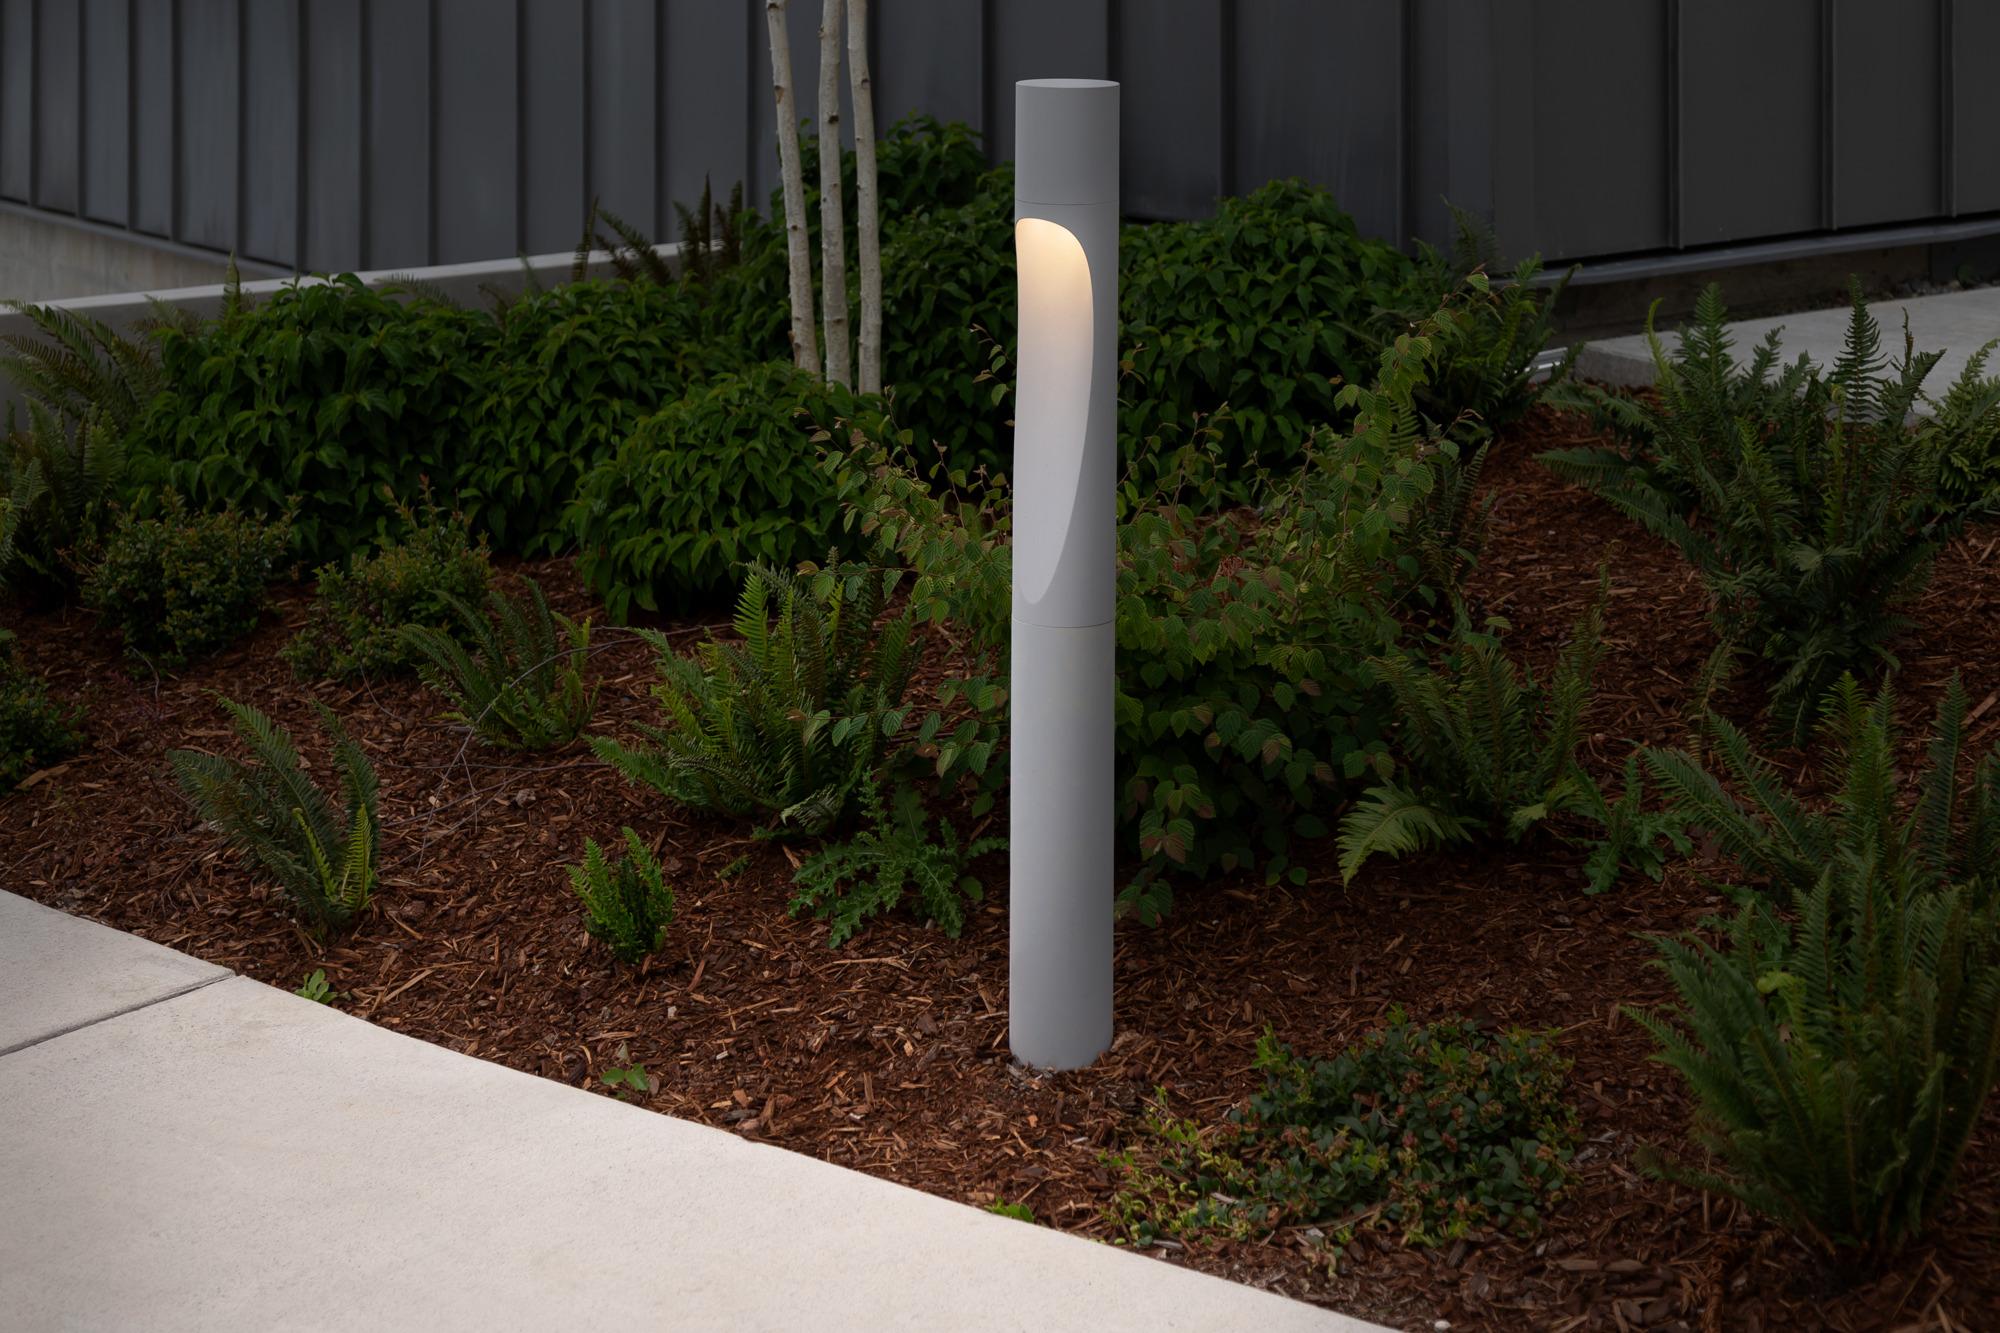 Large 'Flindt Garden' Outdoor Bollard Light in Aluminum for Louis Poulsen

A highly refined fixture that brings bold, sculptural illumination to outdoor spaces. Introduced in 2021, the 'Garden' bollard is the latest addition to the Flindt family,